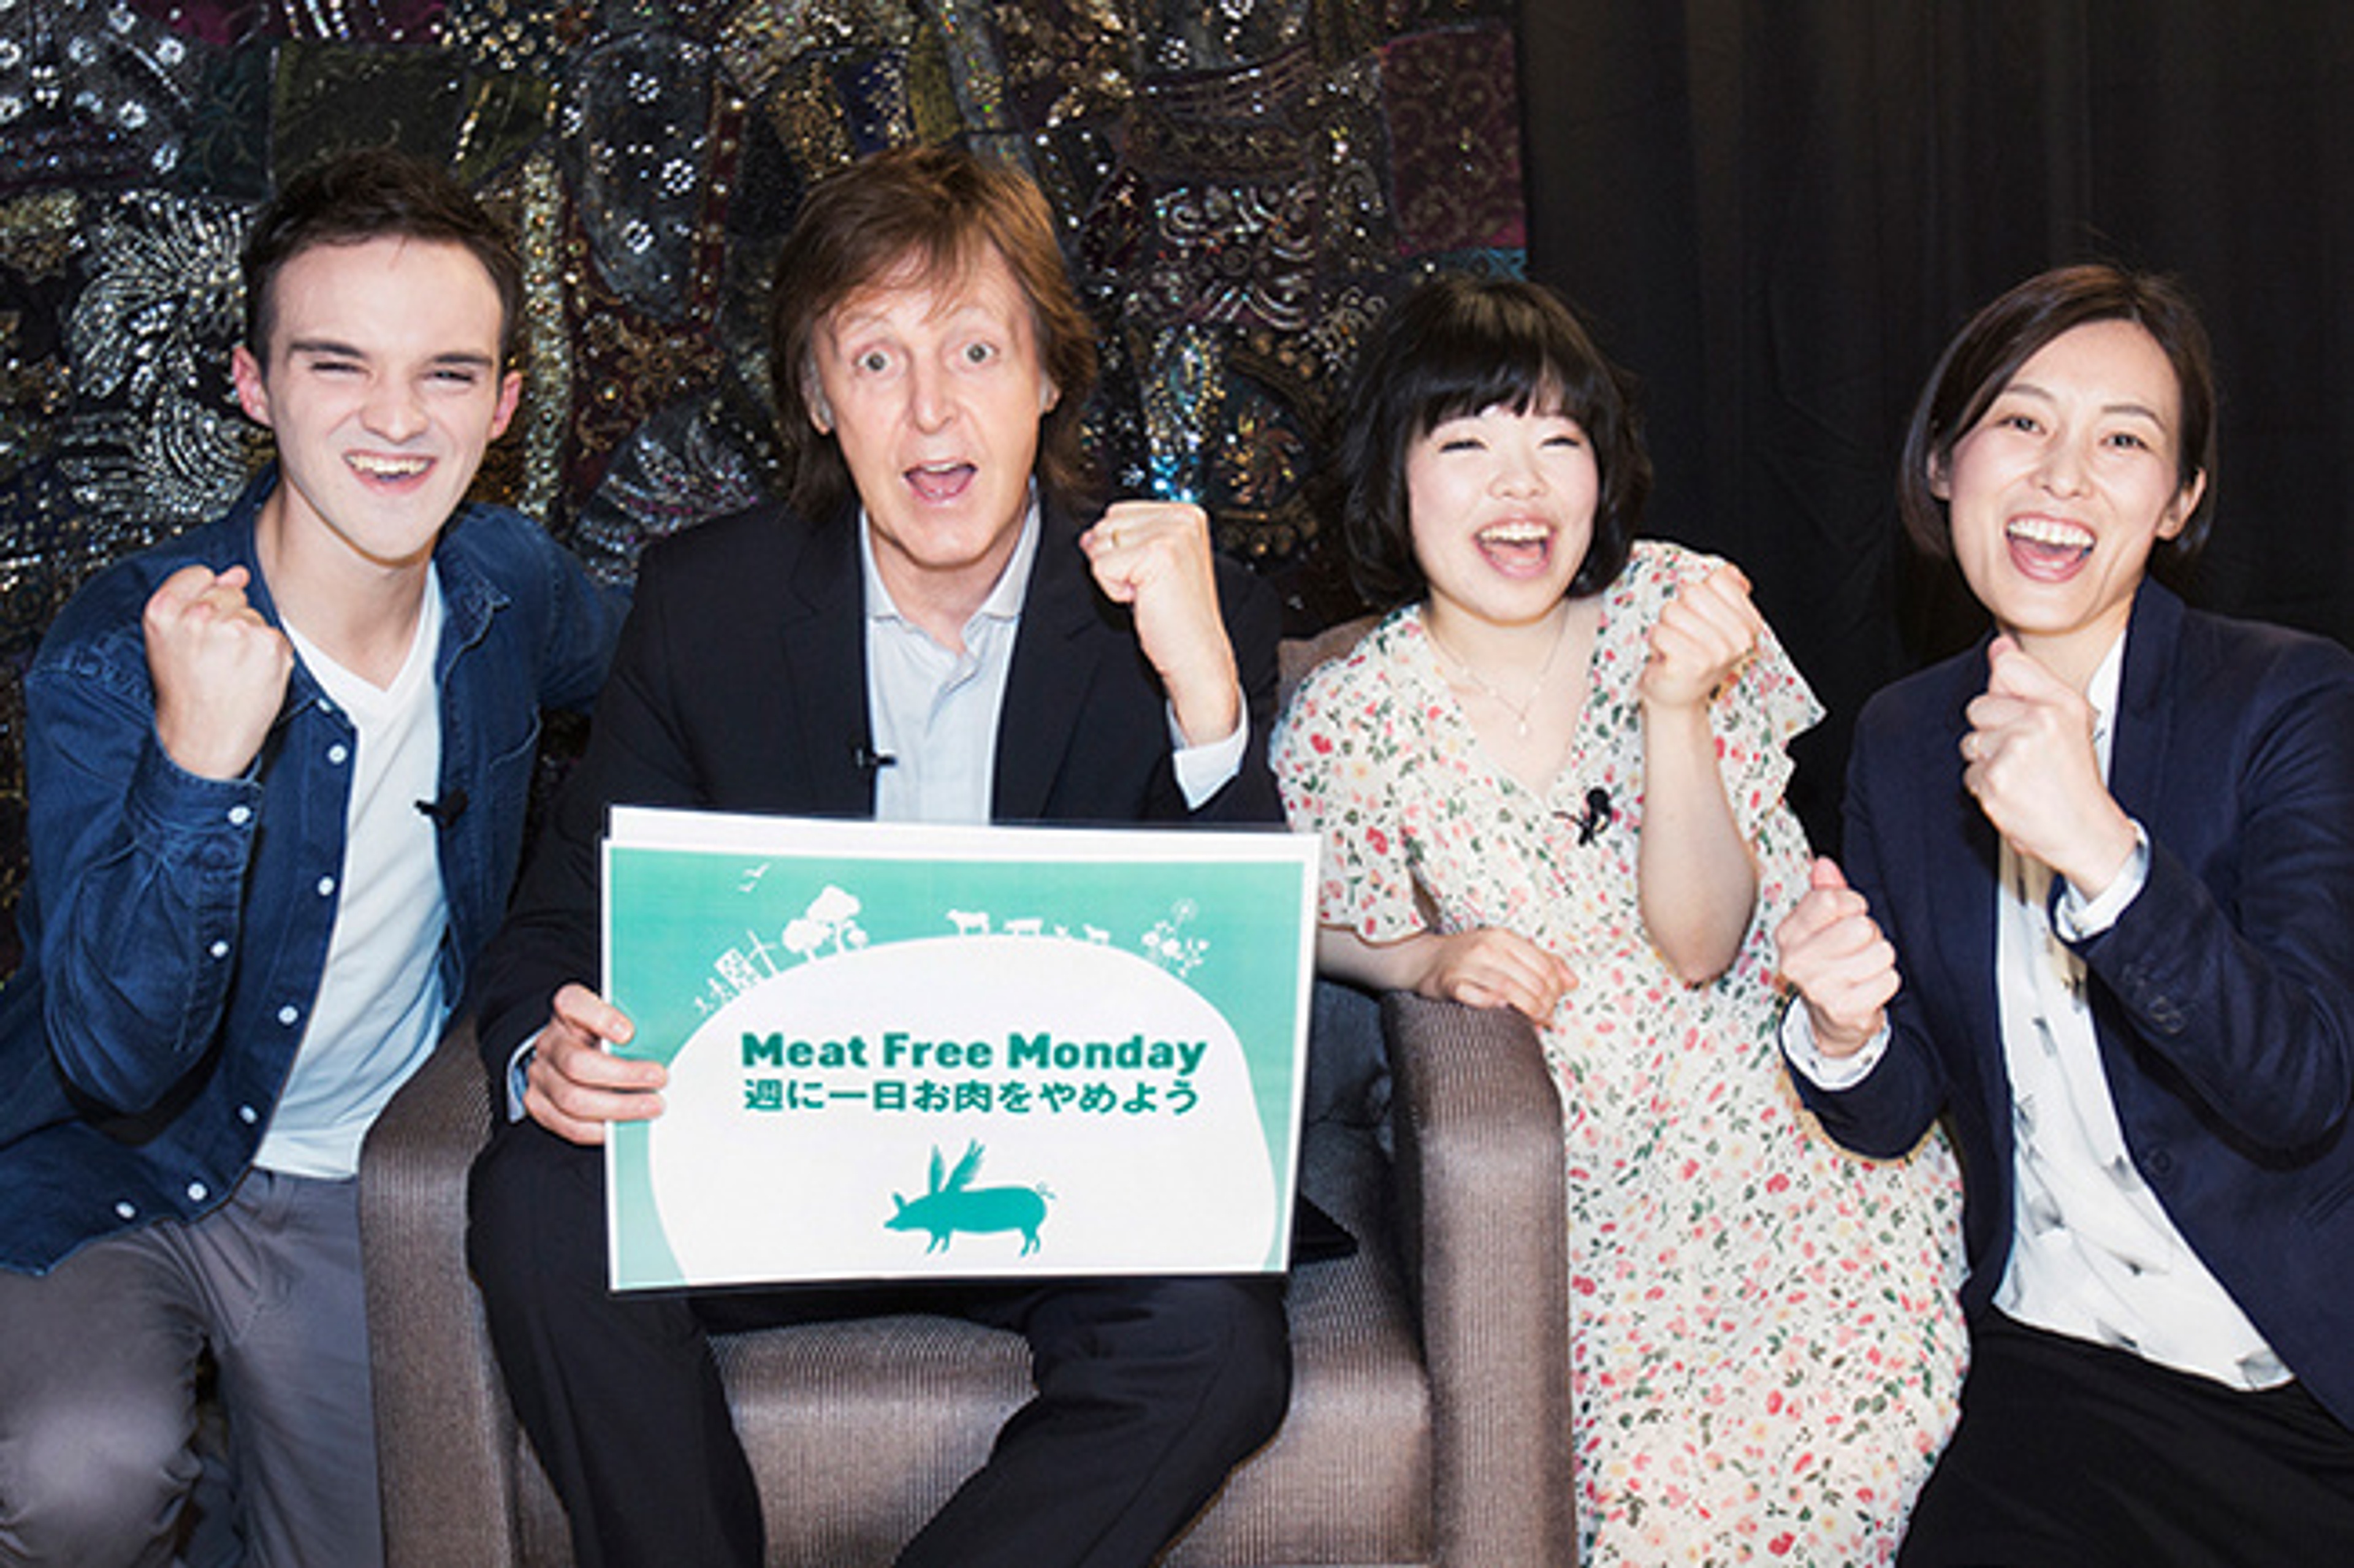 New Video: Meat Free Monday Launches in Japan